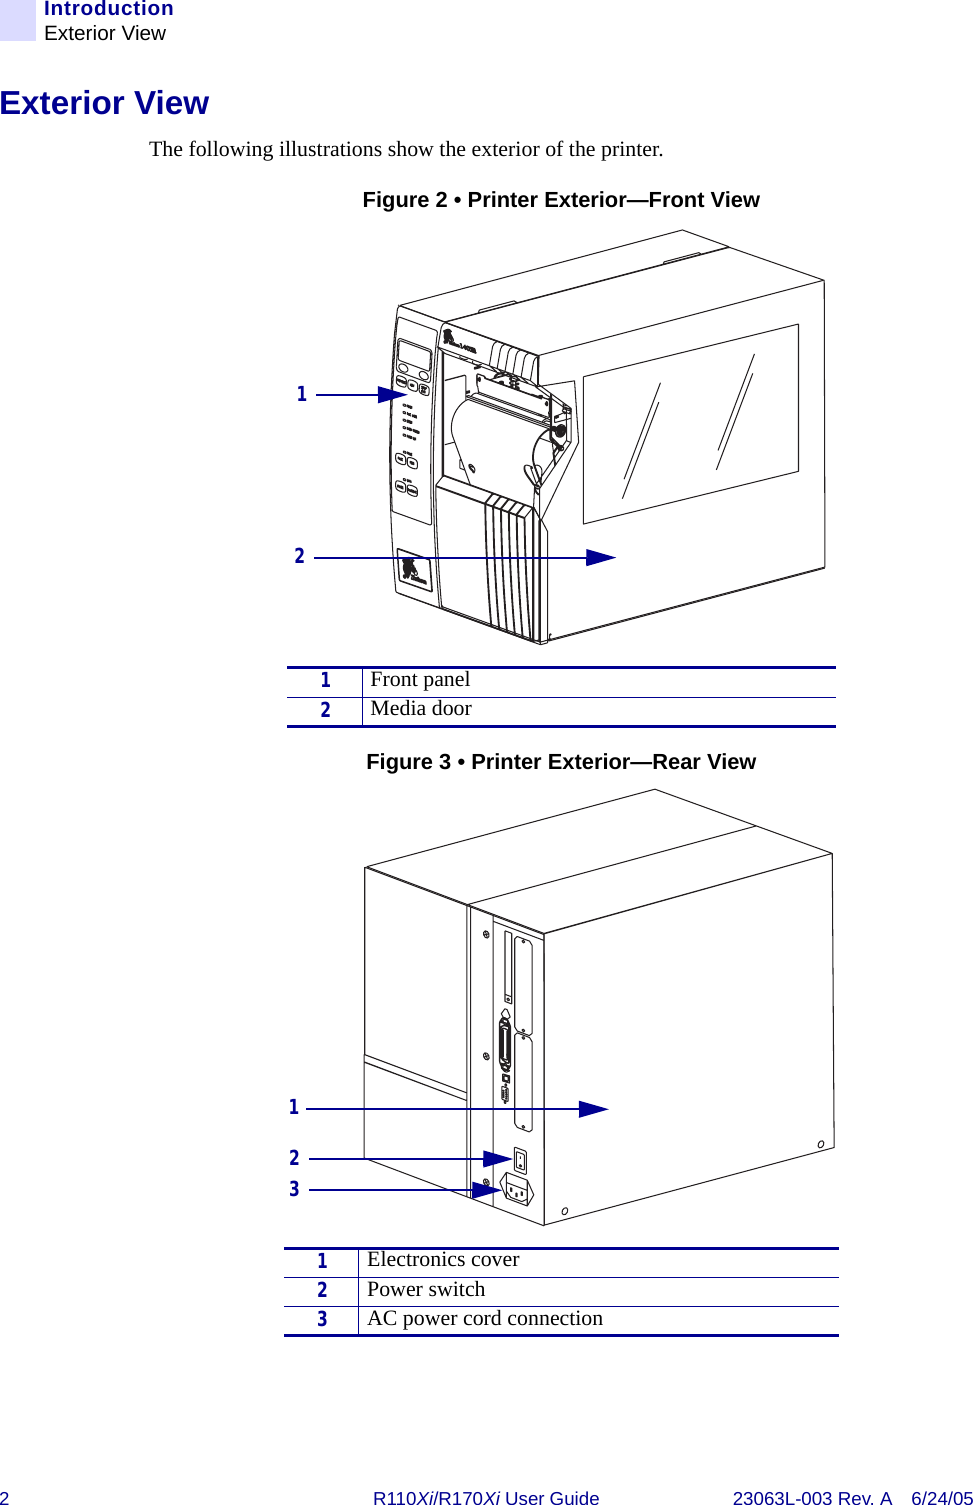 2R110Xi/R170Xi User Guide 23063L-003 Rev. A 6/24/05IntroductionExterior ViewExterior ViewThe following illustrations show the exterior of the printer.Figure 2 • Printer Exterior—Front ViewFigure 3 • Printer Exterior—Rear View1Front panel2Media door1Electronics cover2Power switch3AC power cord connection12213